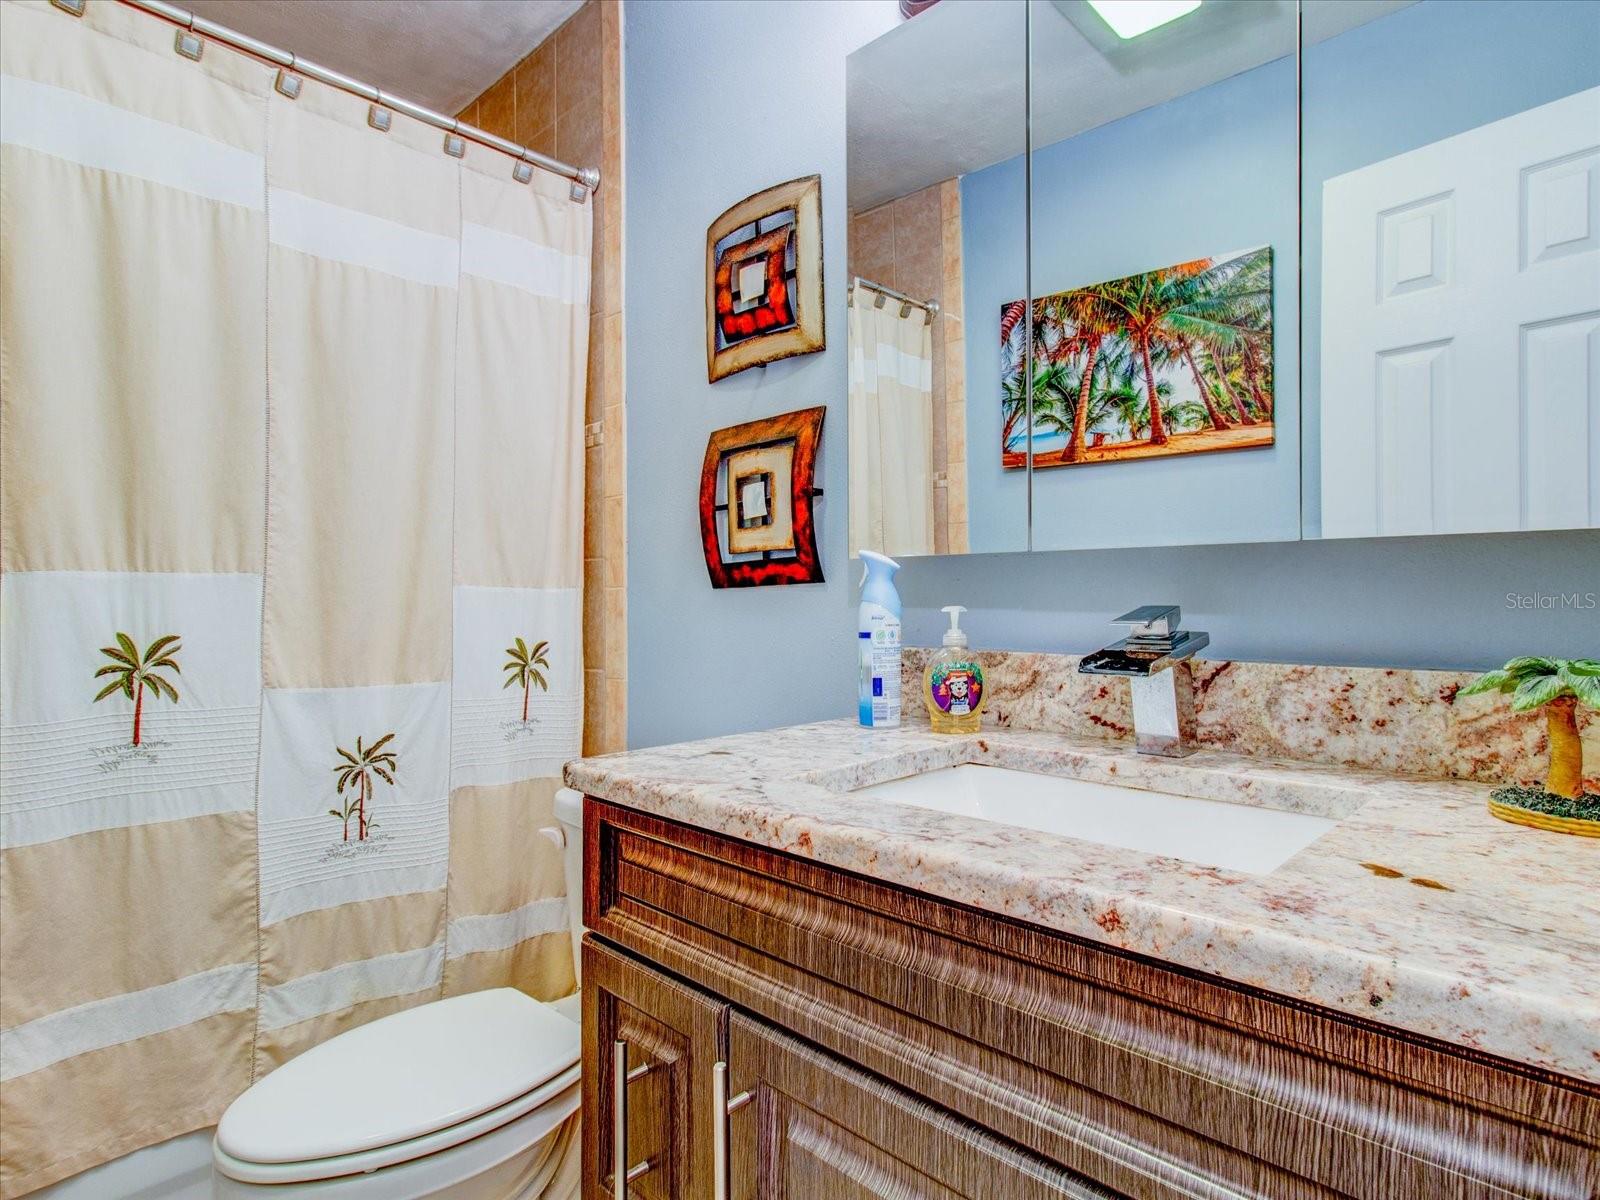 2nd Bathroom w/a Tub/Shower Combo,Single Vanity, Vanity Faucet Turns Blue When On #1